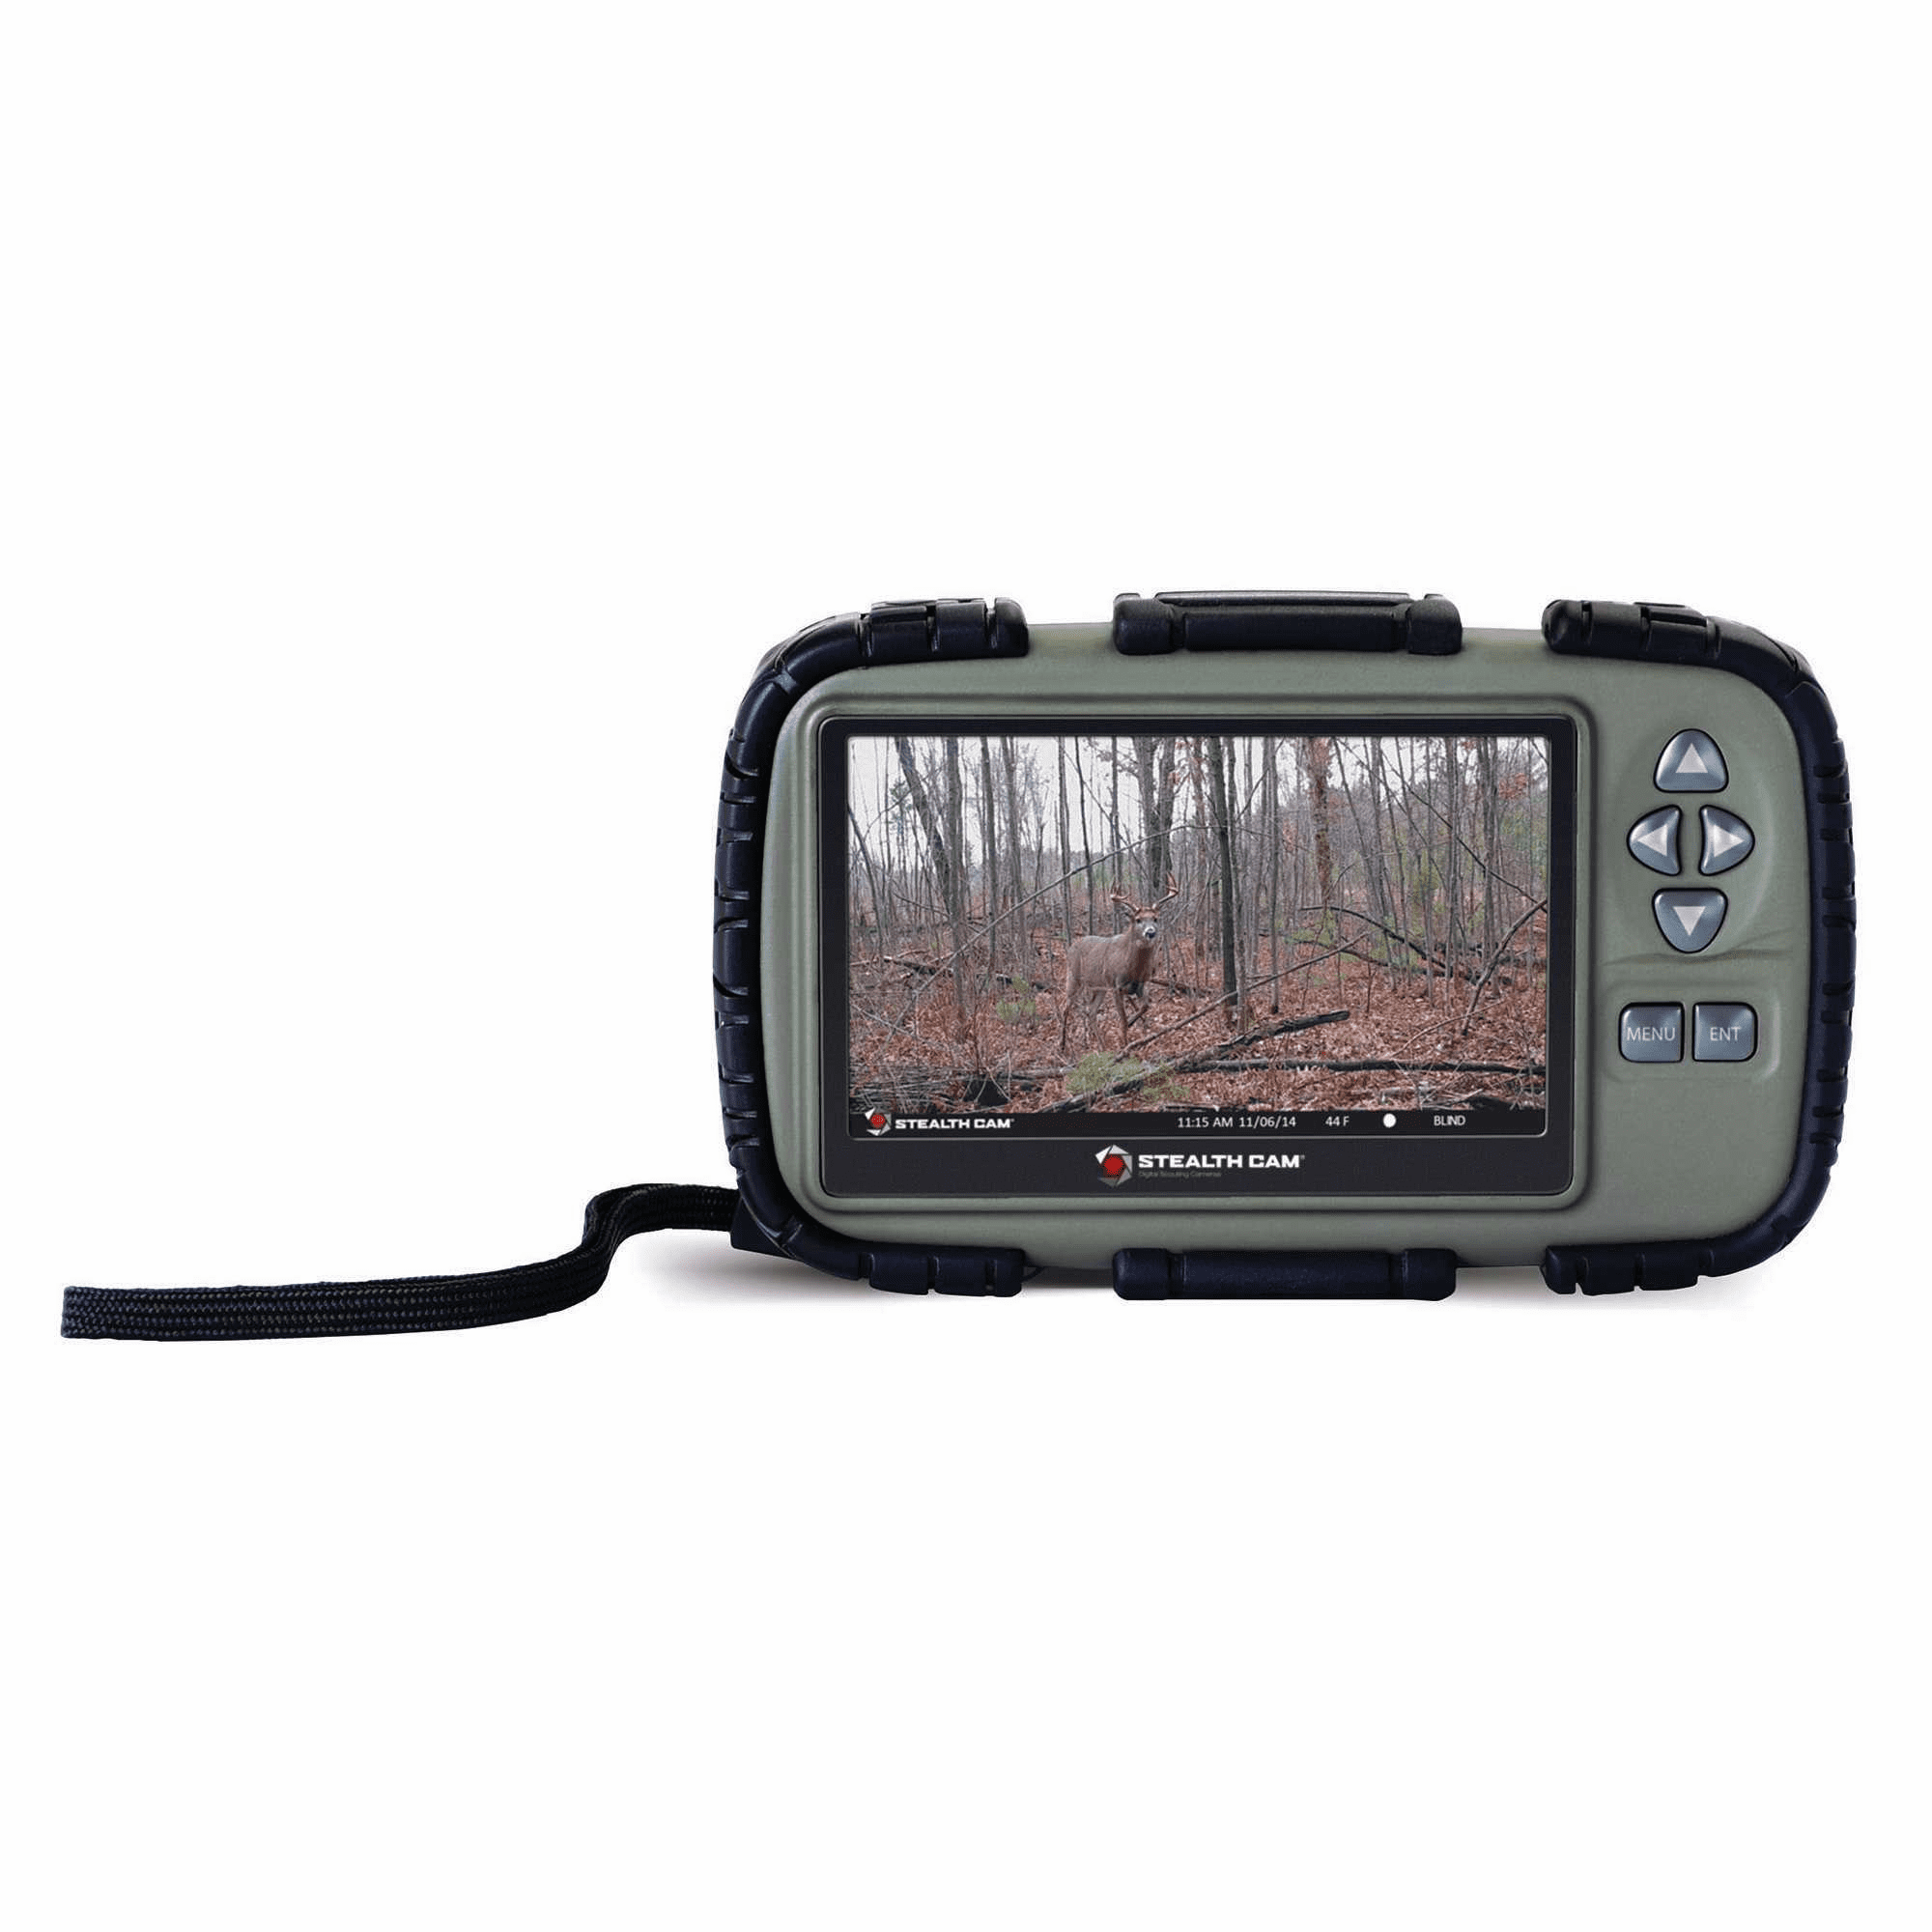 Hard Travel Case For Stealth Cam Sd Card Reader Viewer 4.3 Lcd With 4.3 Lcd 